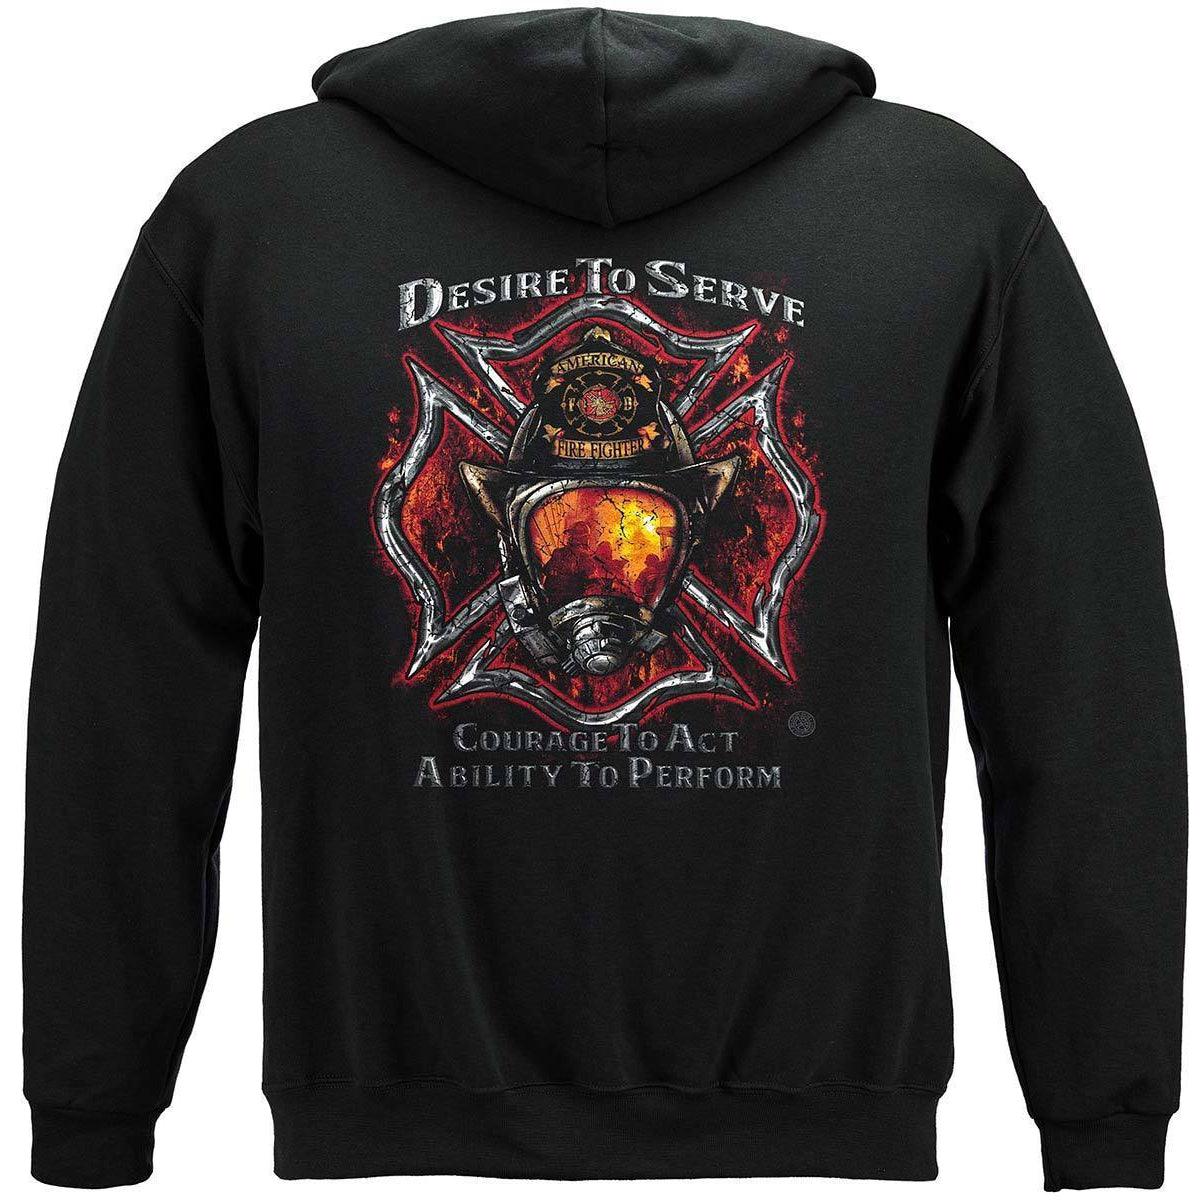 Desire To Serve Firefighter T-Shirt – Military Republic